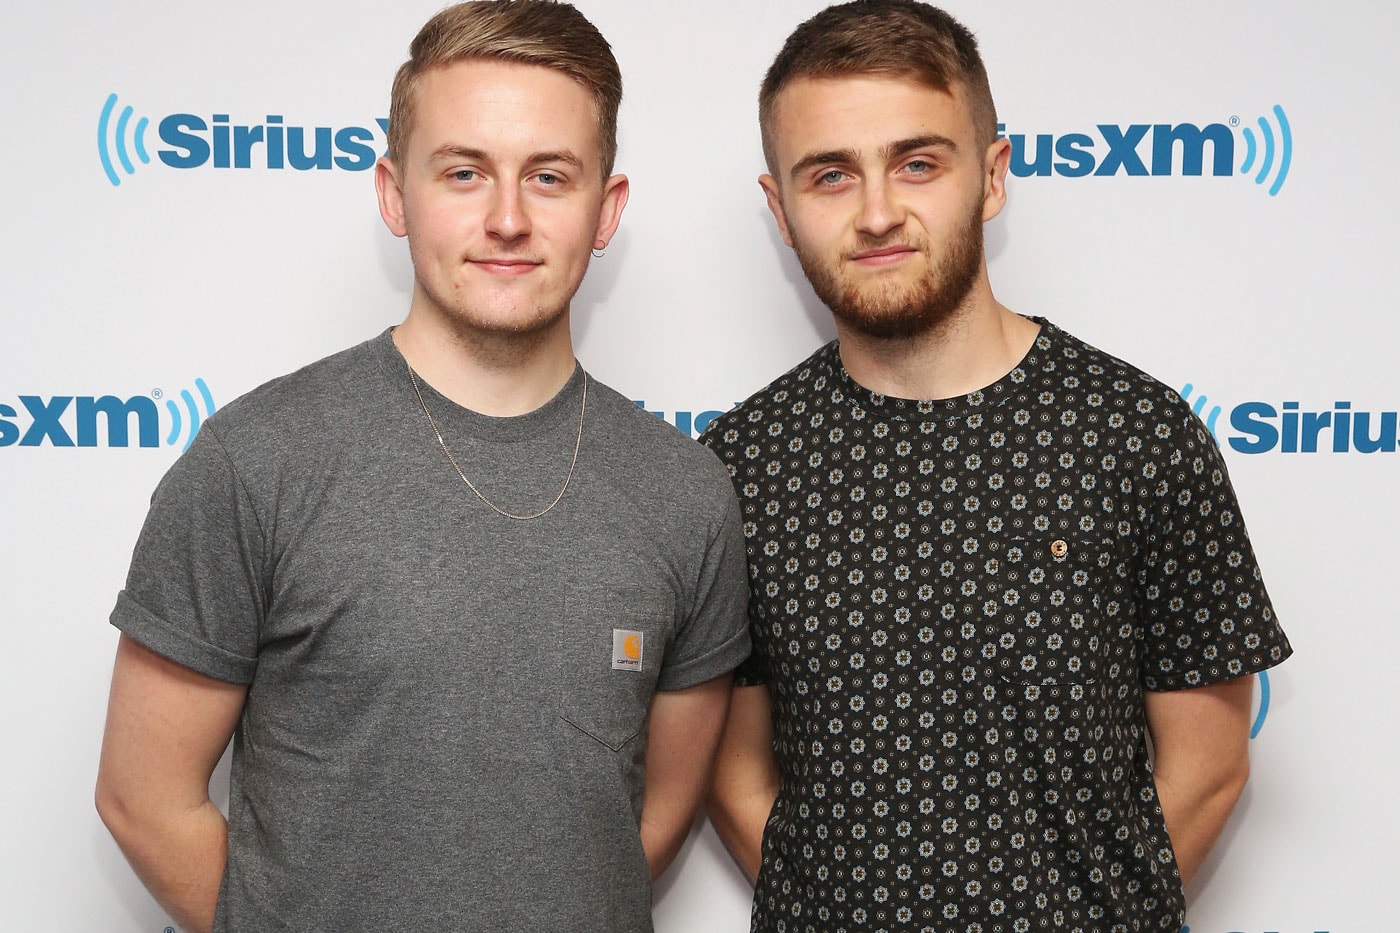 Listen to a Snippet of Disclosure and Lorde's "Magnets"